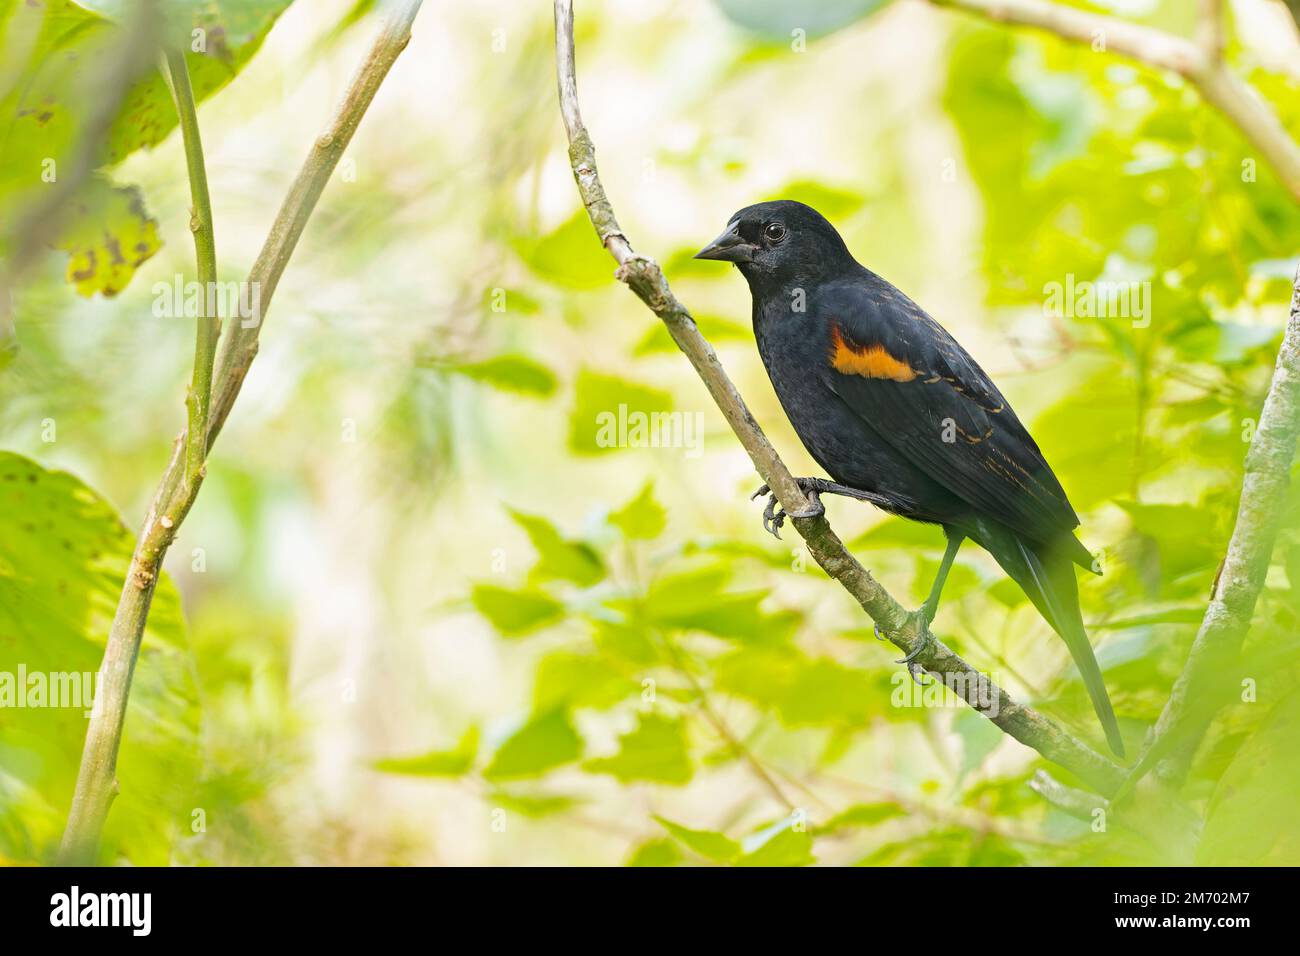 The red-winged blackbird (Agelaius phoeniceus) perched in a tree backlit by the sun. Stock Photo